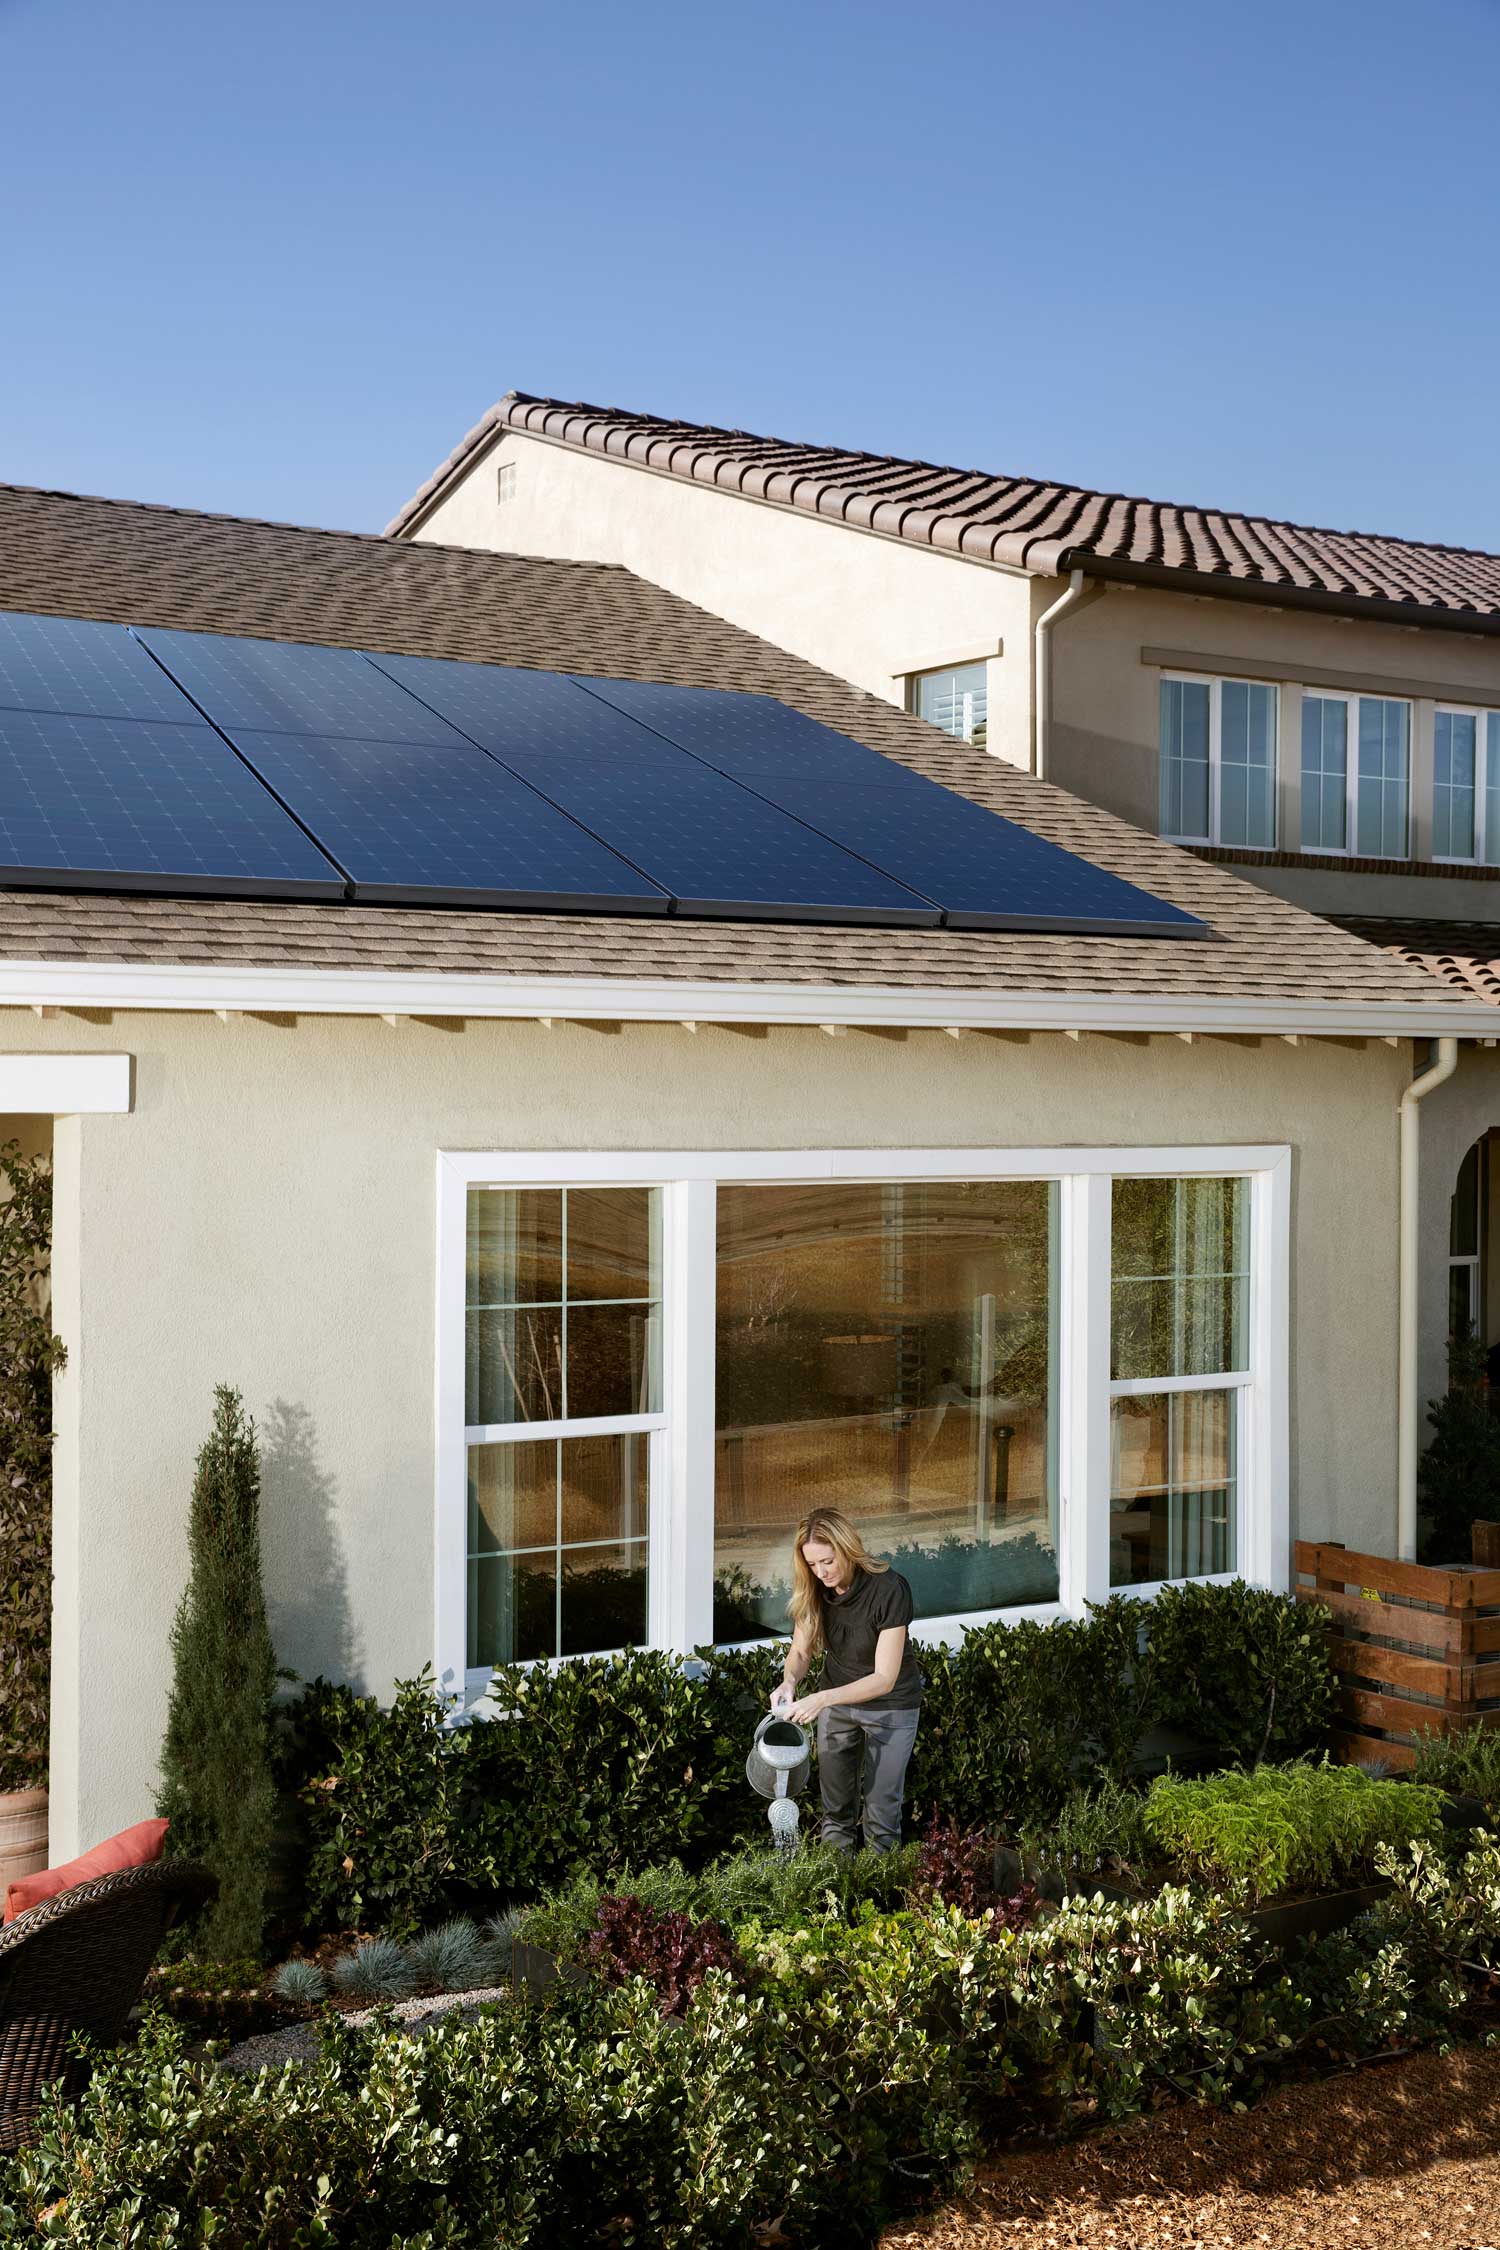 SunPower by Custom Energy is the best company for solar savings in Layton.